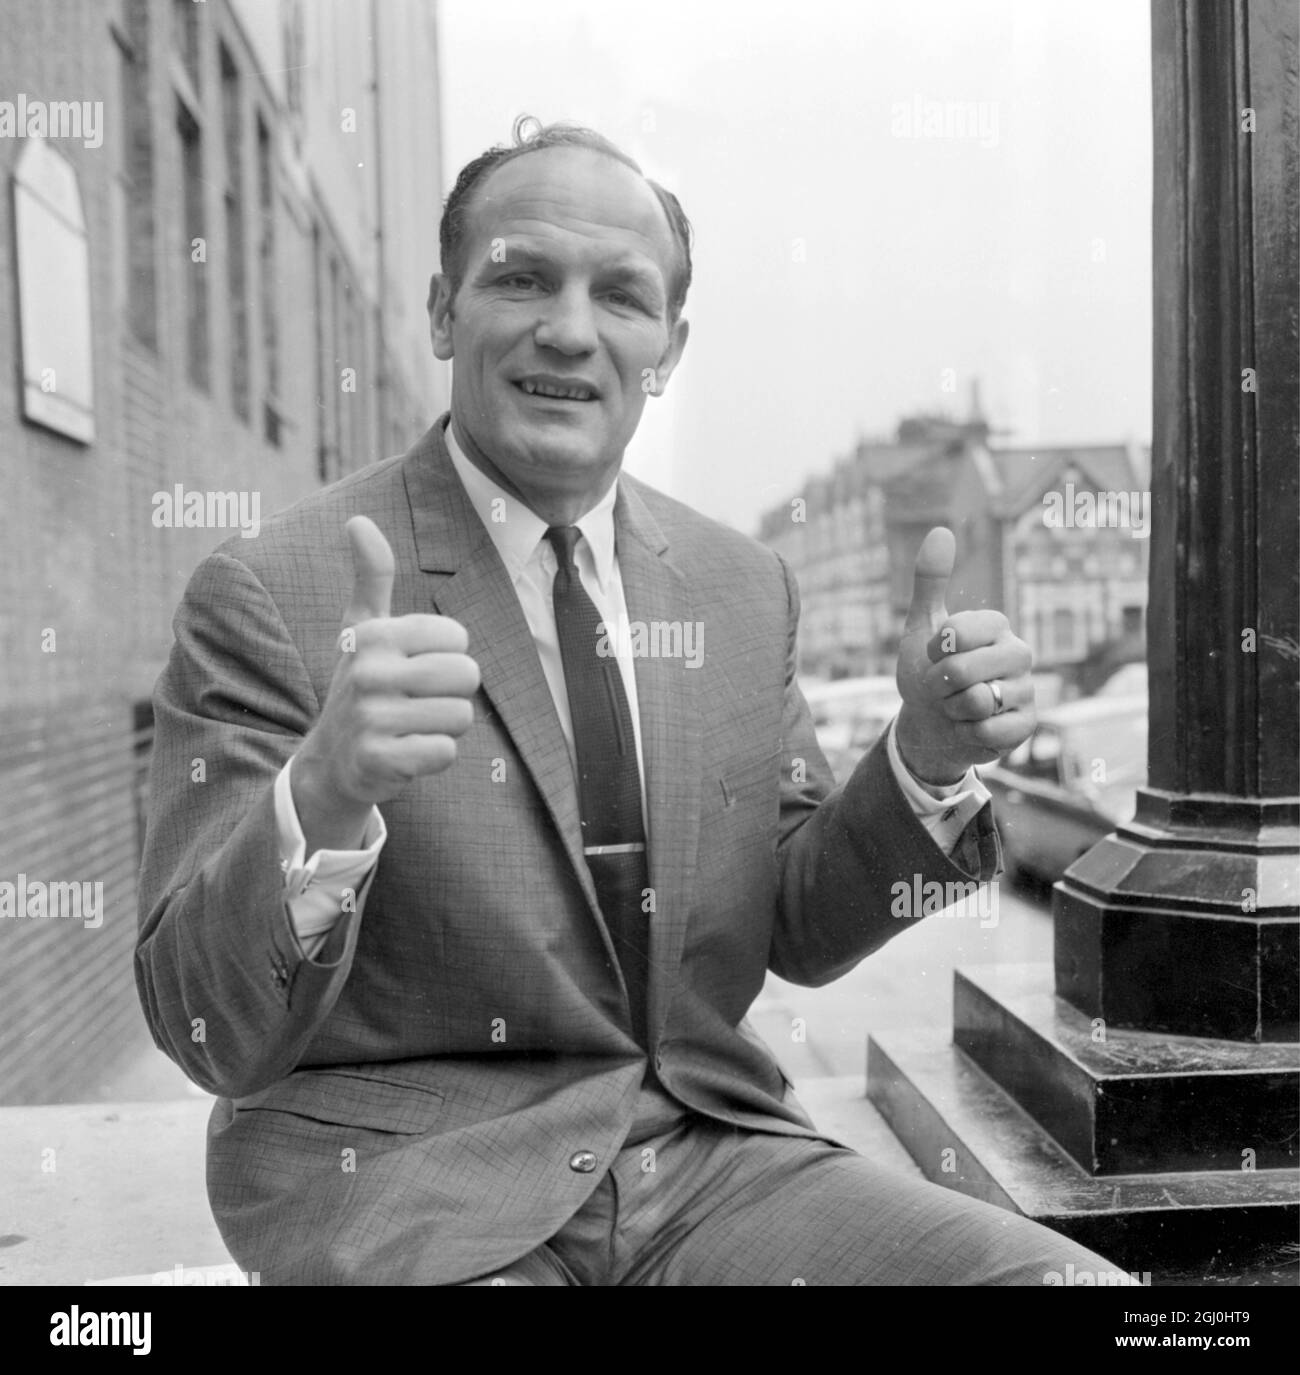 London: A delighted Henry Cooper, the form British Heavyweight champion , gives a double thumbs-up sign to celebrate the good new he heard this morning about the damaged cartilage in hjis right leg. Cooperis seen leaving Arseanal Headquarter at Highbufry Stadium ater being told that he can resume training for his fight with American's Jimmy Ellis. The contest will now take place on Novedsmber 1st 24 September 1969 Stock Photo